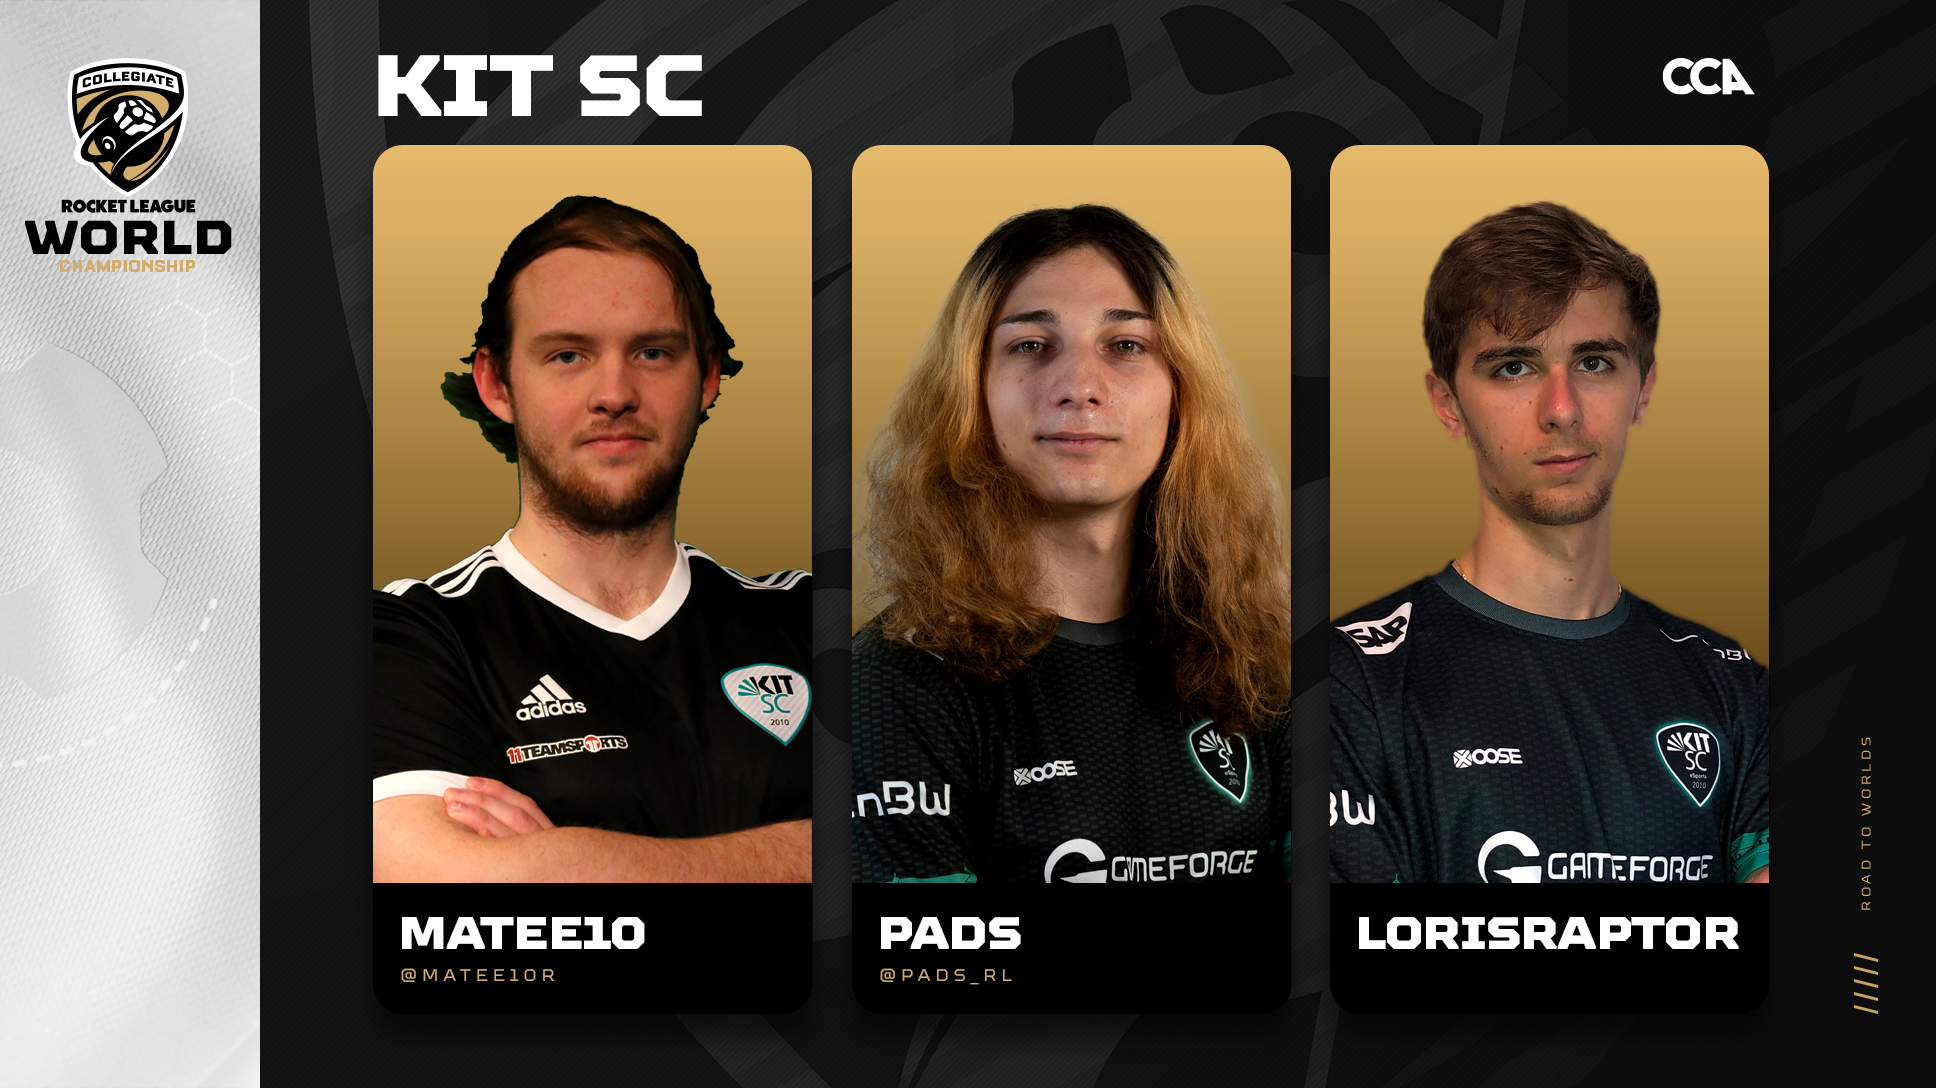 KIT SC Road to Worlds header with images of Matee10, Pads, and LorisRaptor